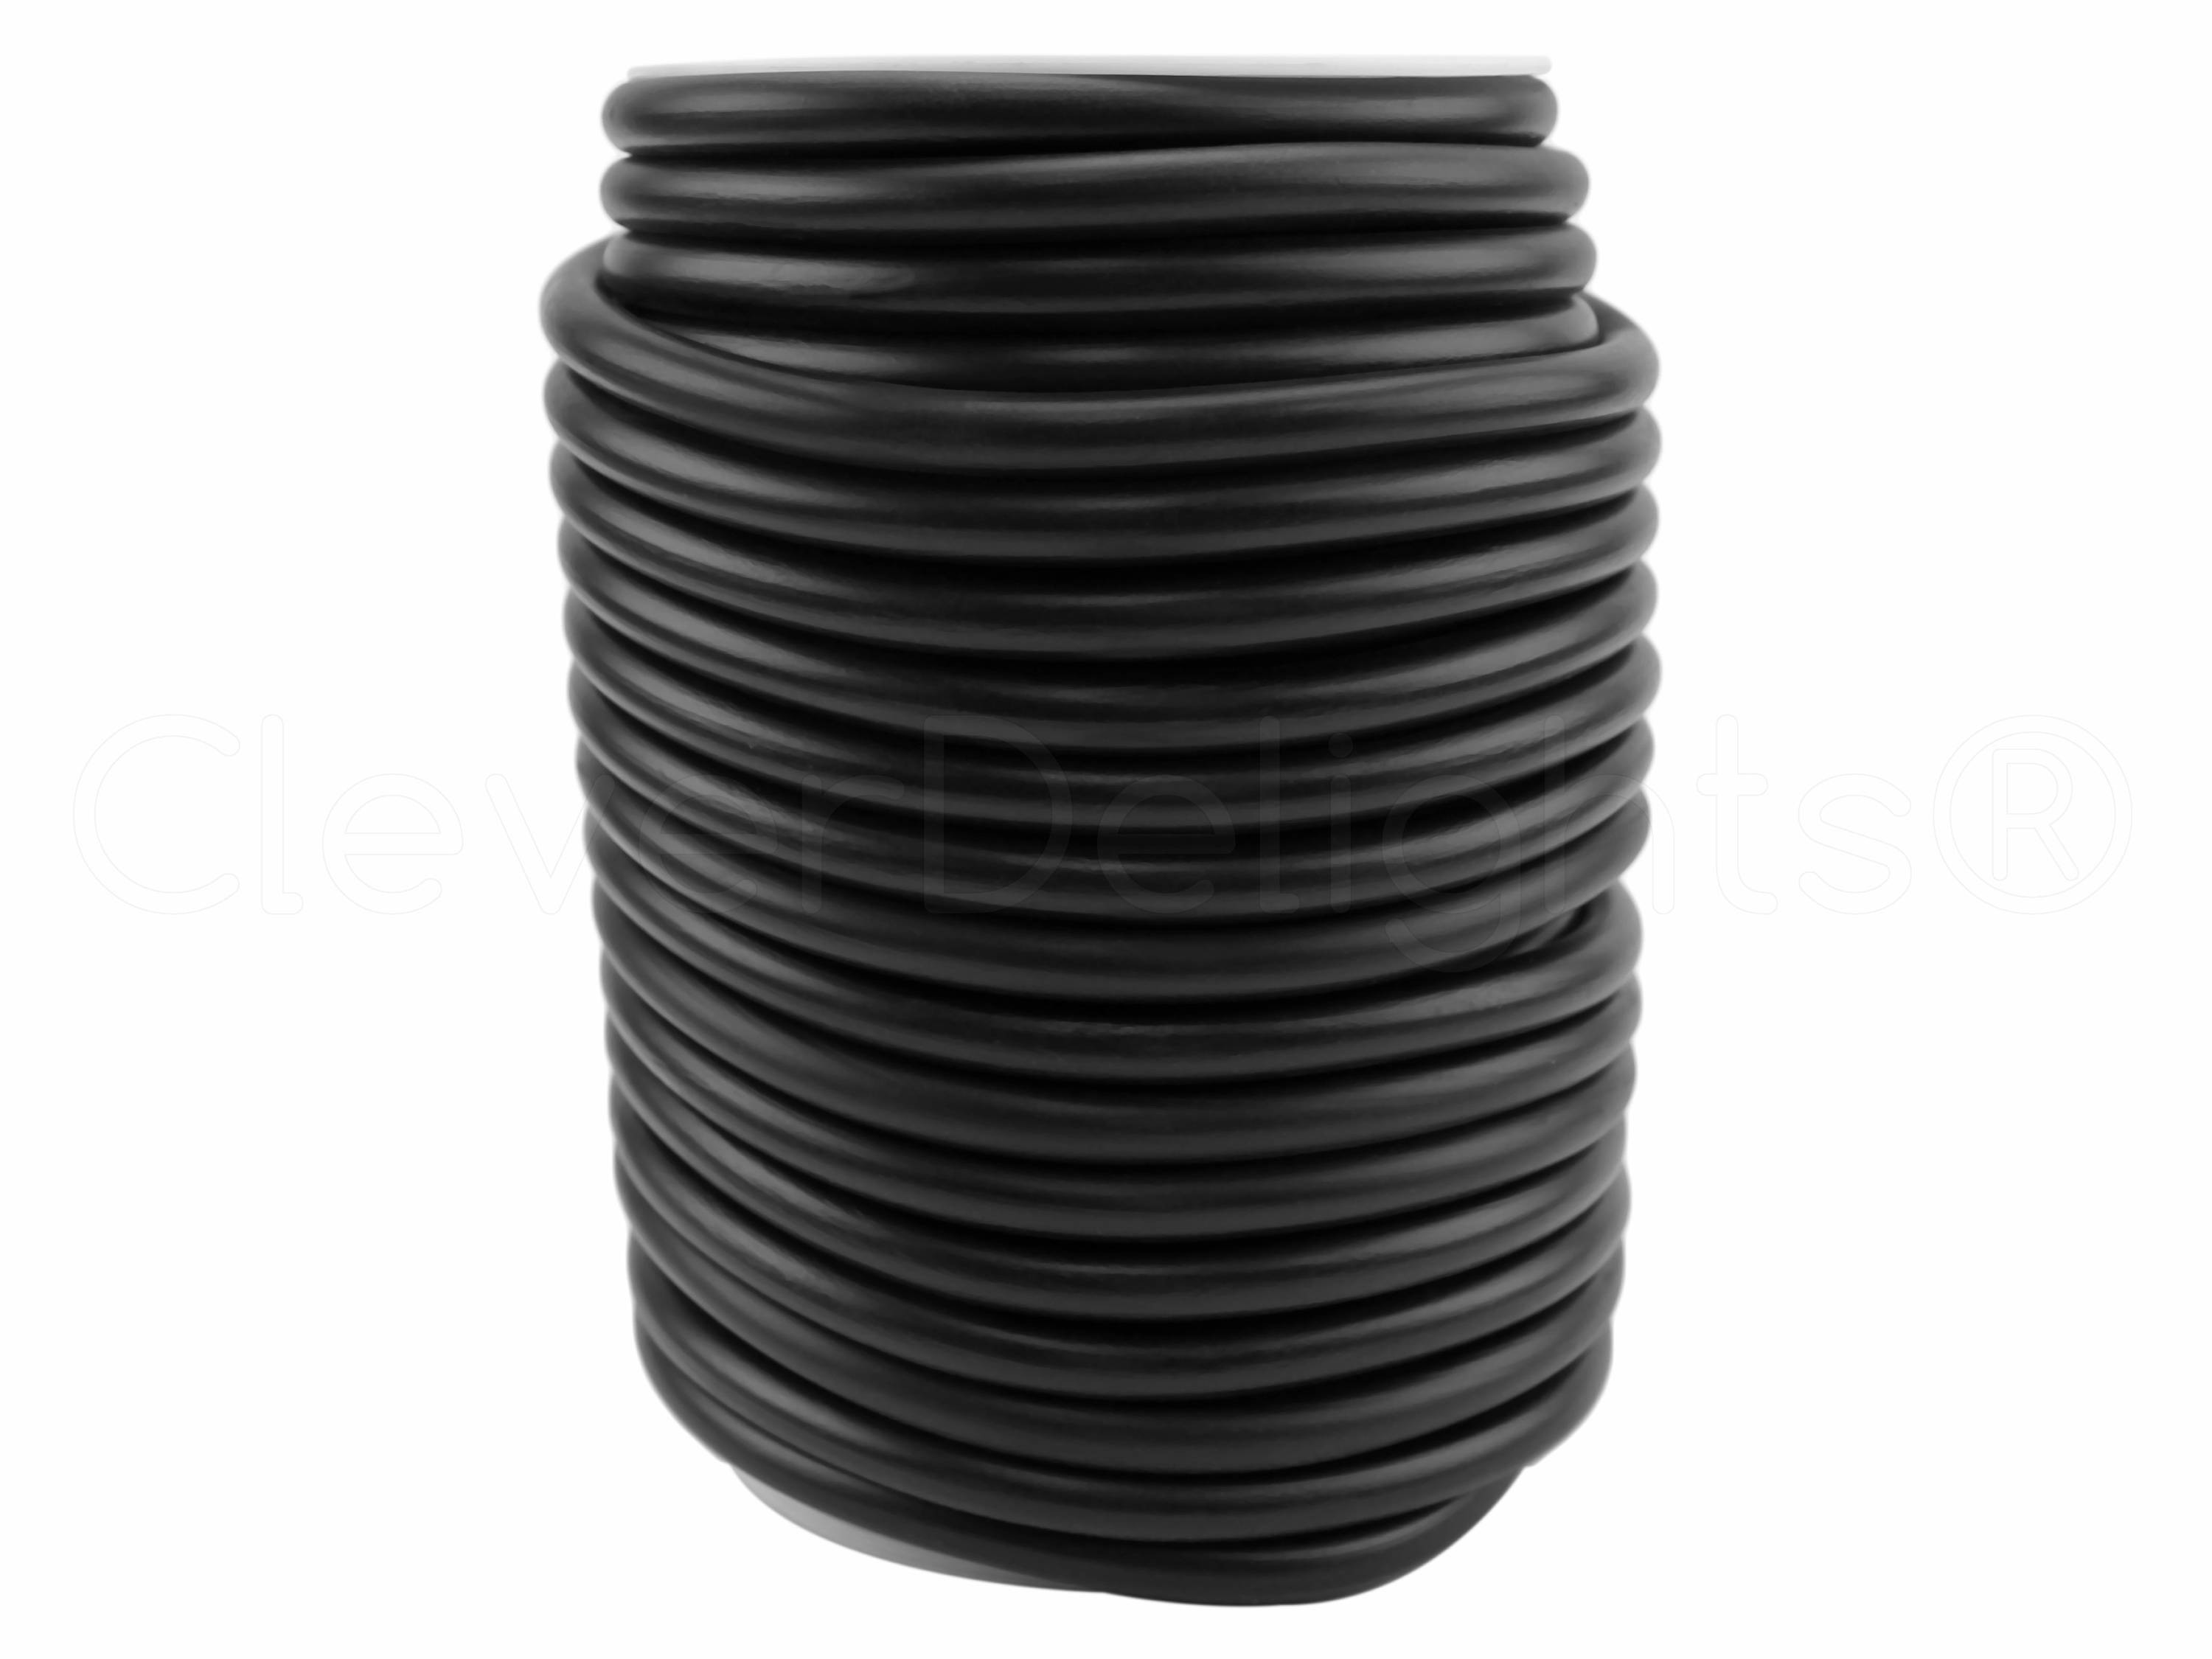 16 inch cylinder vases bulk of 10 yds solid rubber cord 8mm 5 16 black color etsy pertaining to dzoom